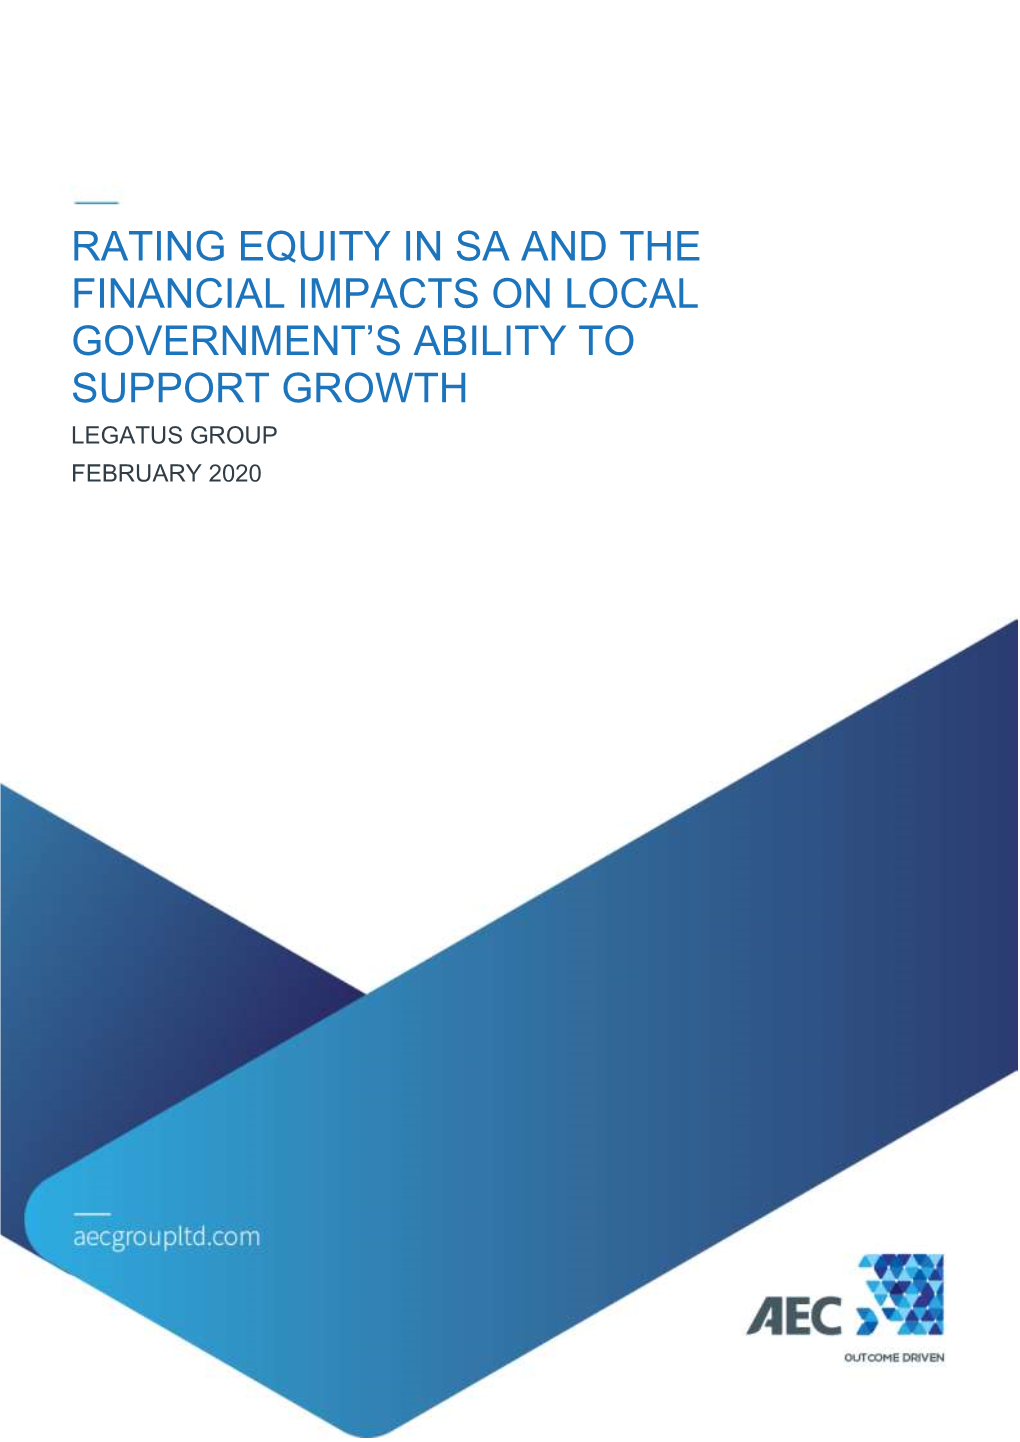 Rating Equity in Sa and the Financial Impacts on Local Government's Ability to Support Growth